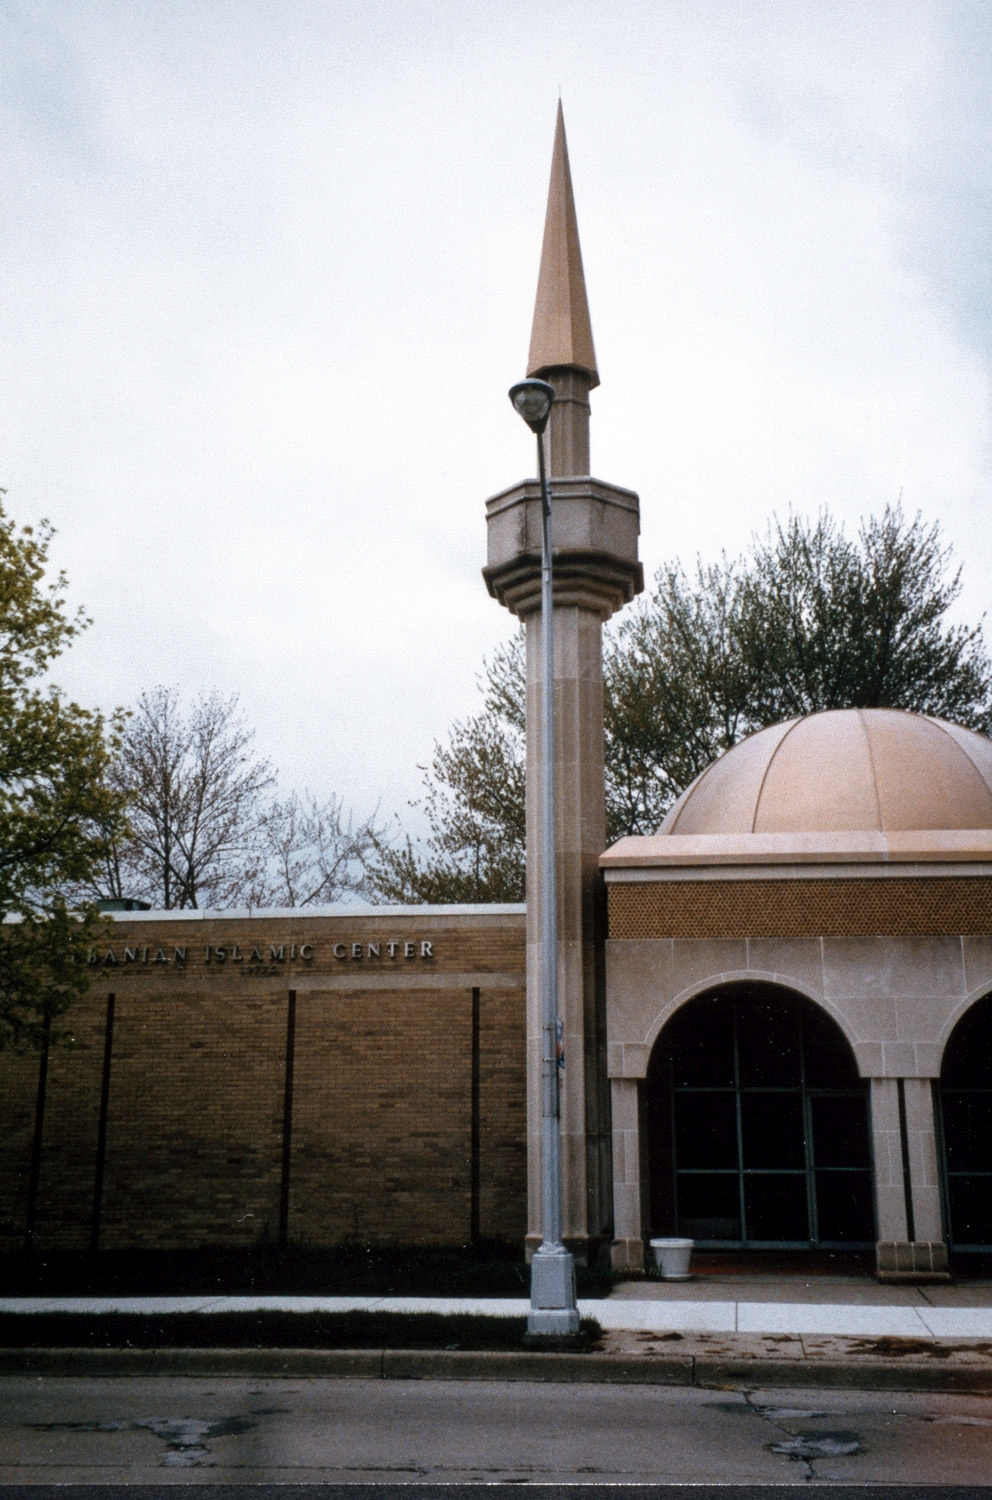 Albanian Islamic Center - Partial view of front entrance with dome above and minaret